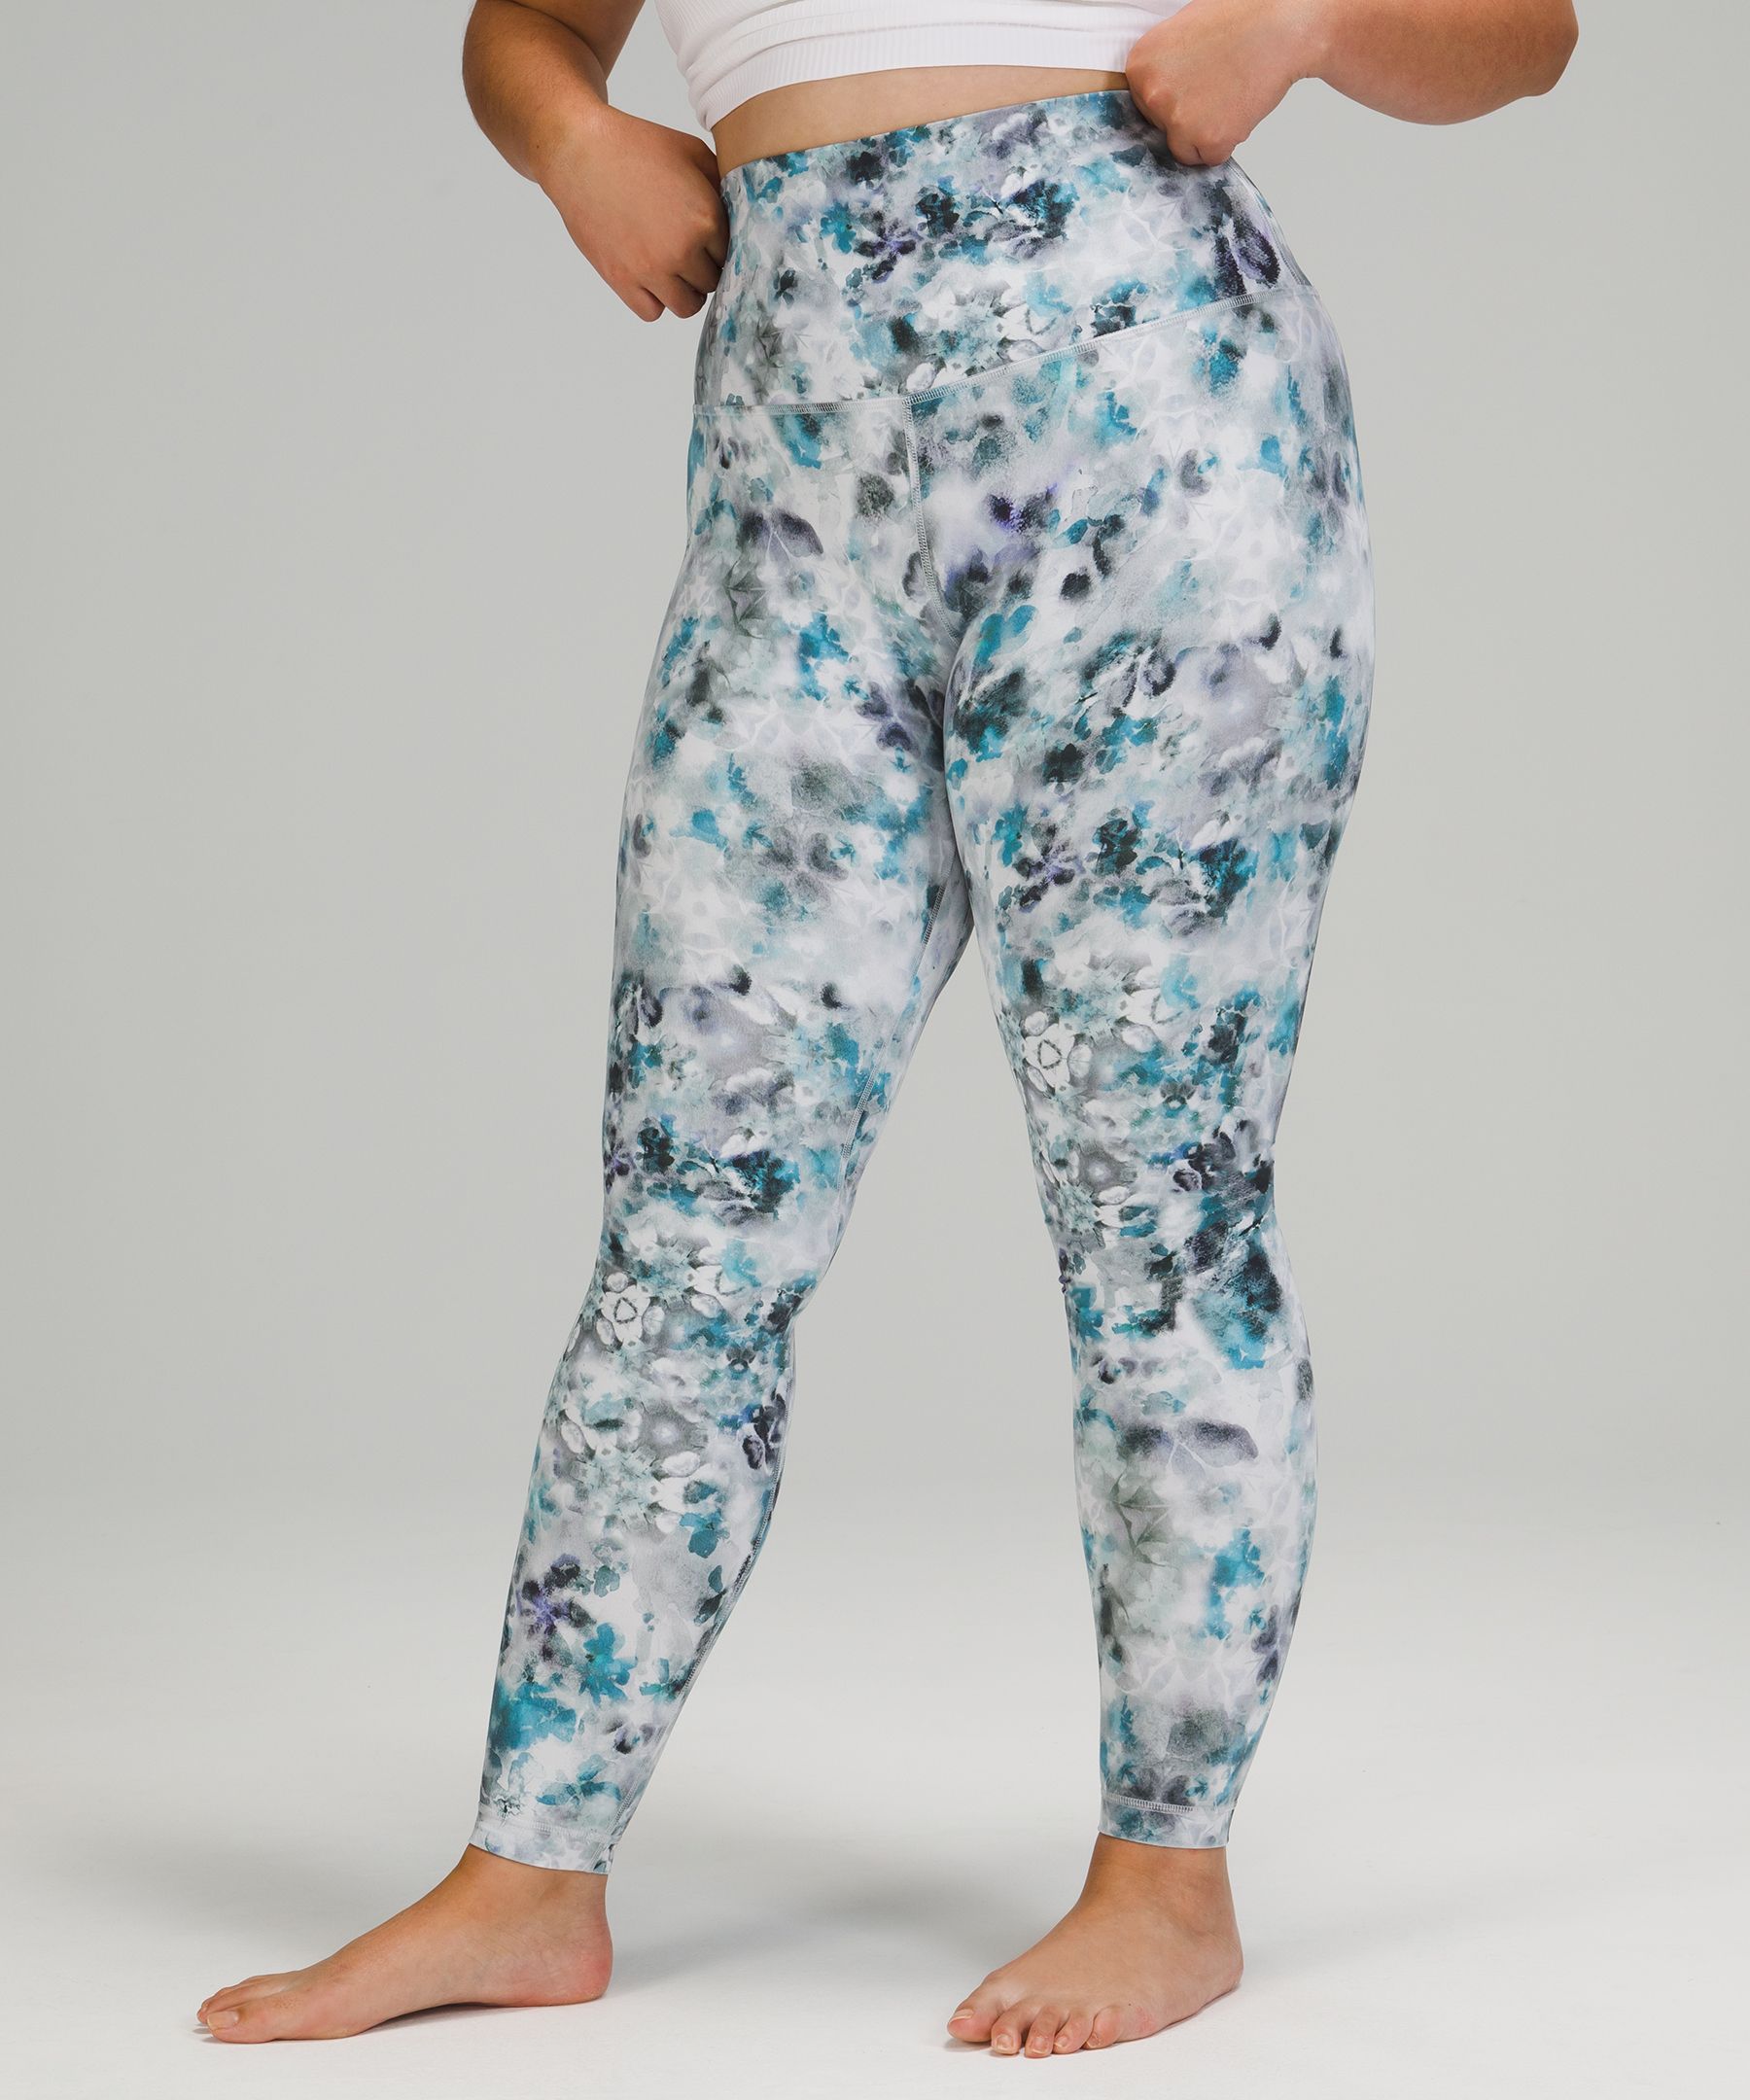 Lululemon Align™ Super-high-rise Pant 28" *online Only In Kaleidofloral Multi